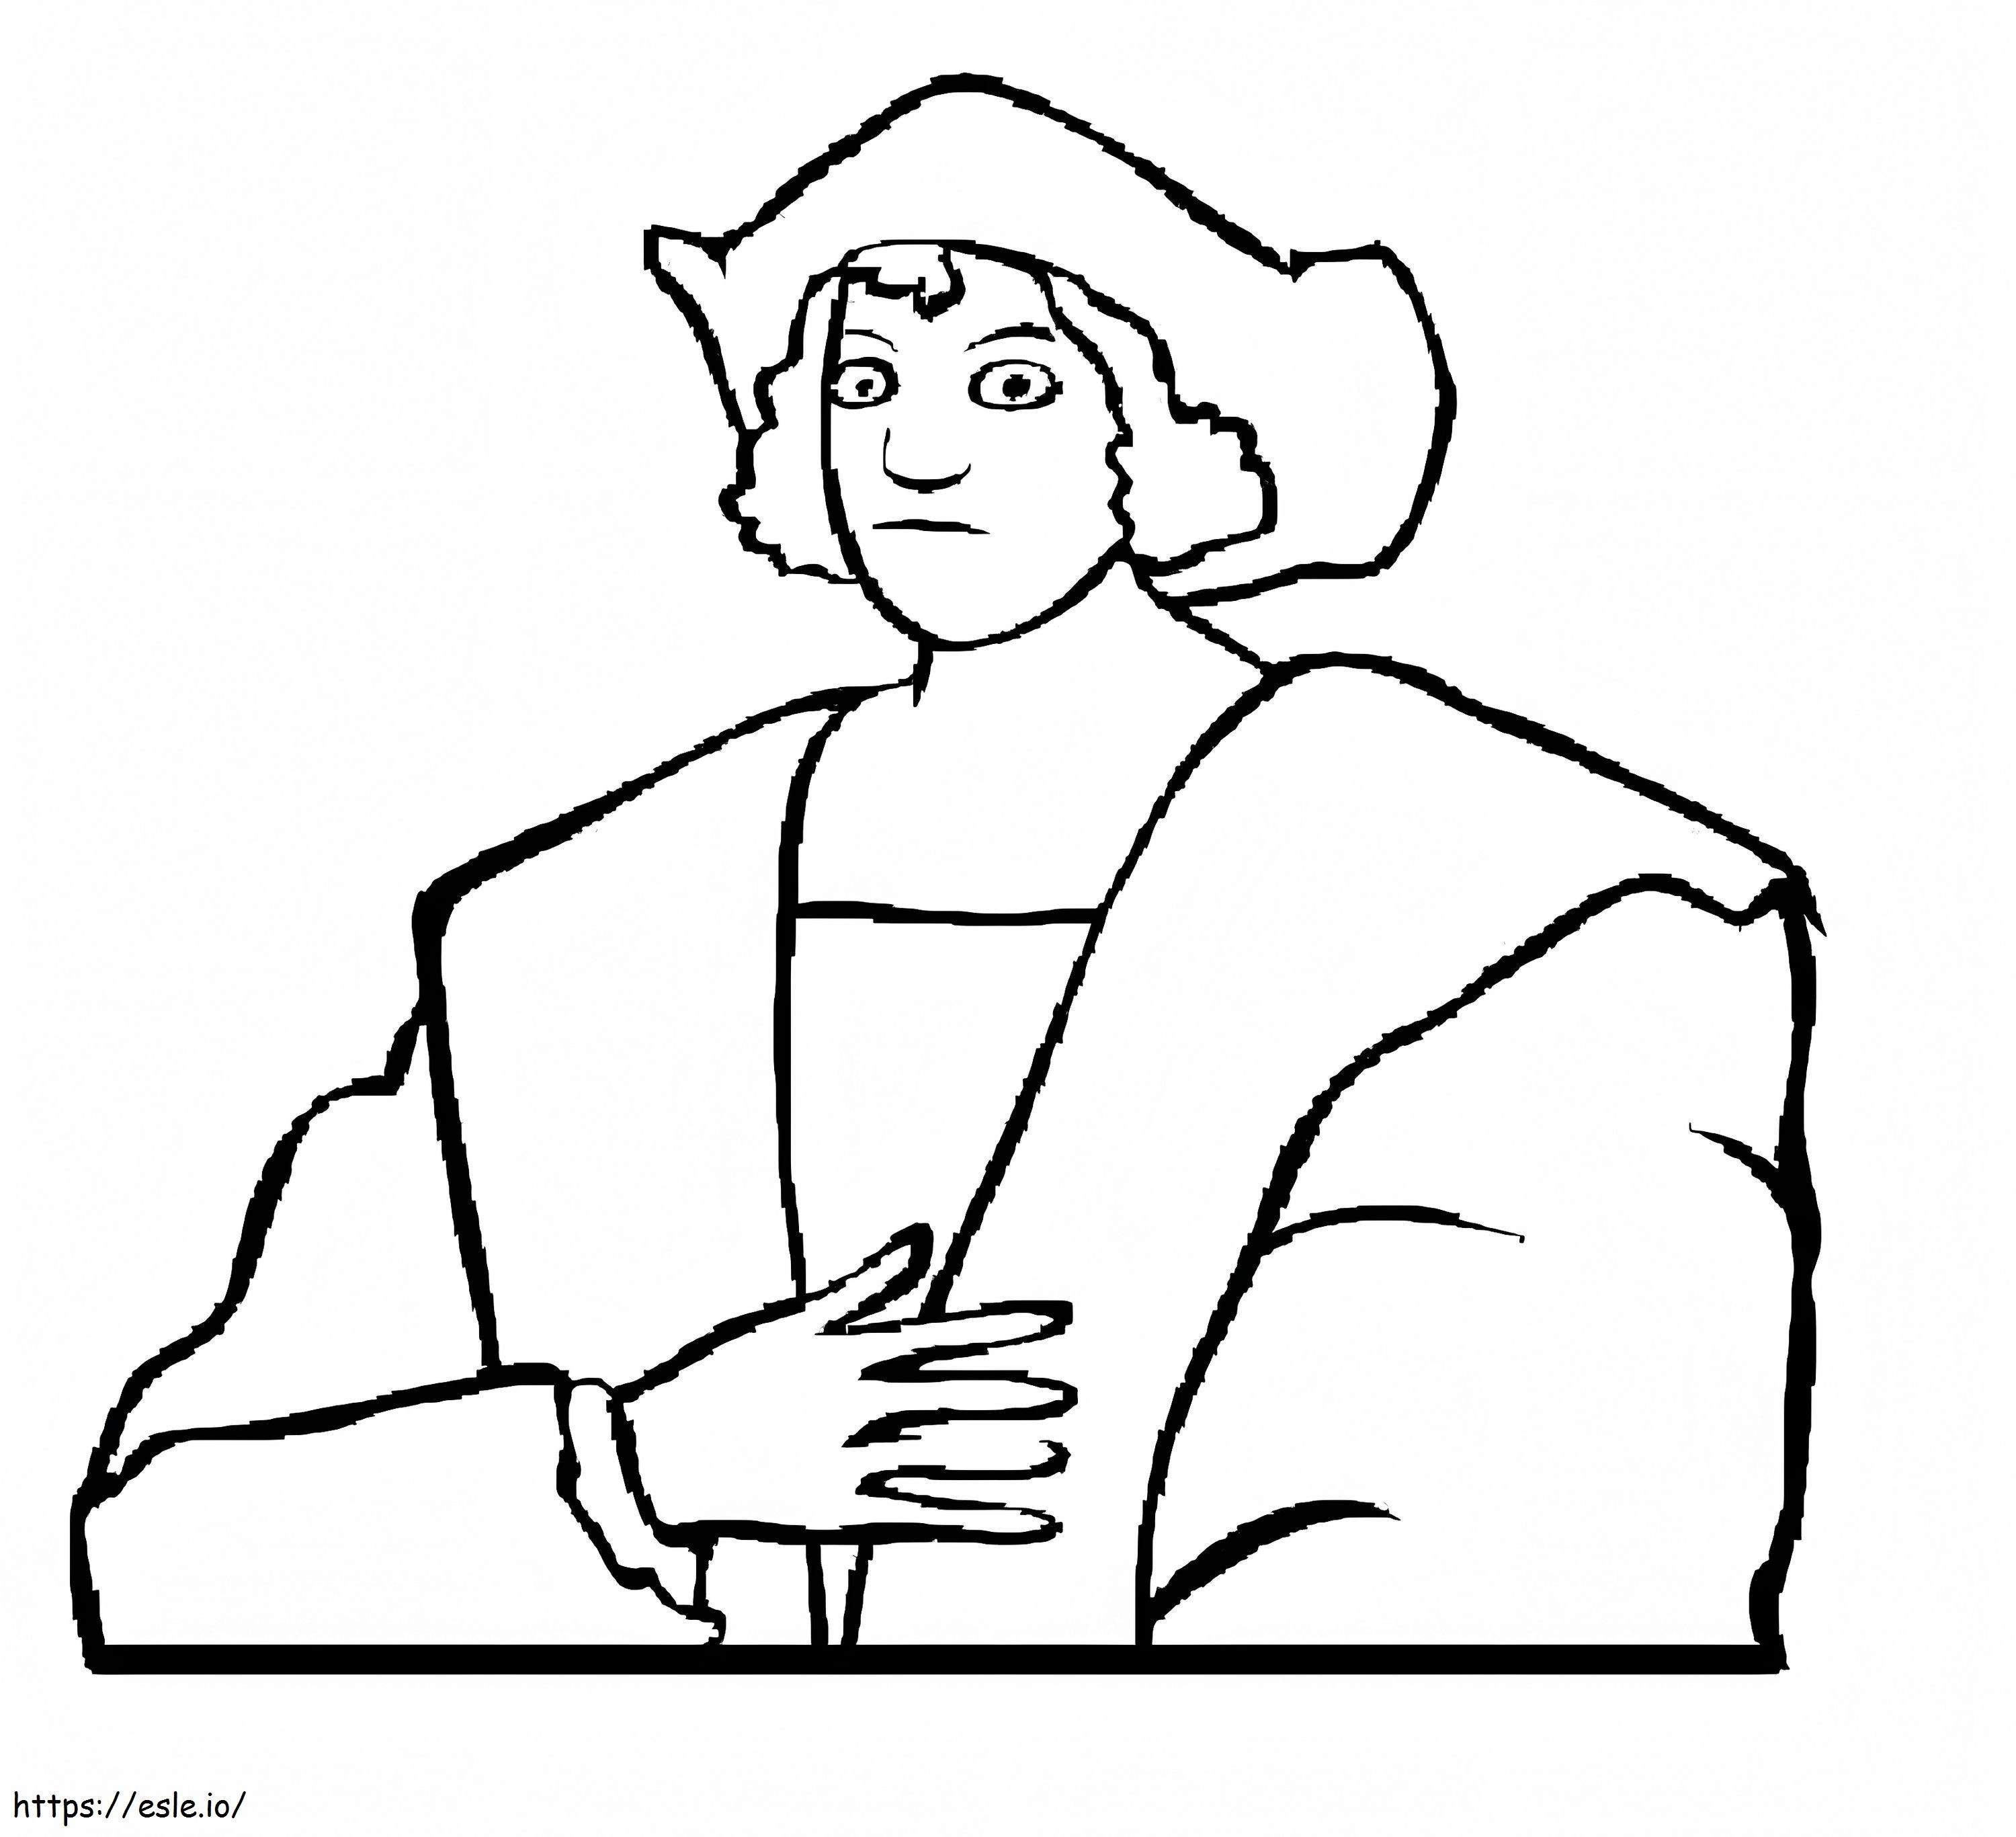 Christopher Columbus 19 coloring page